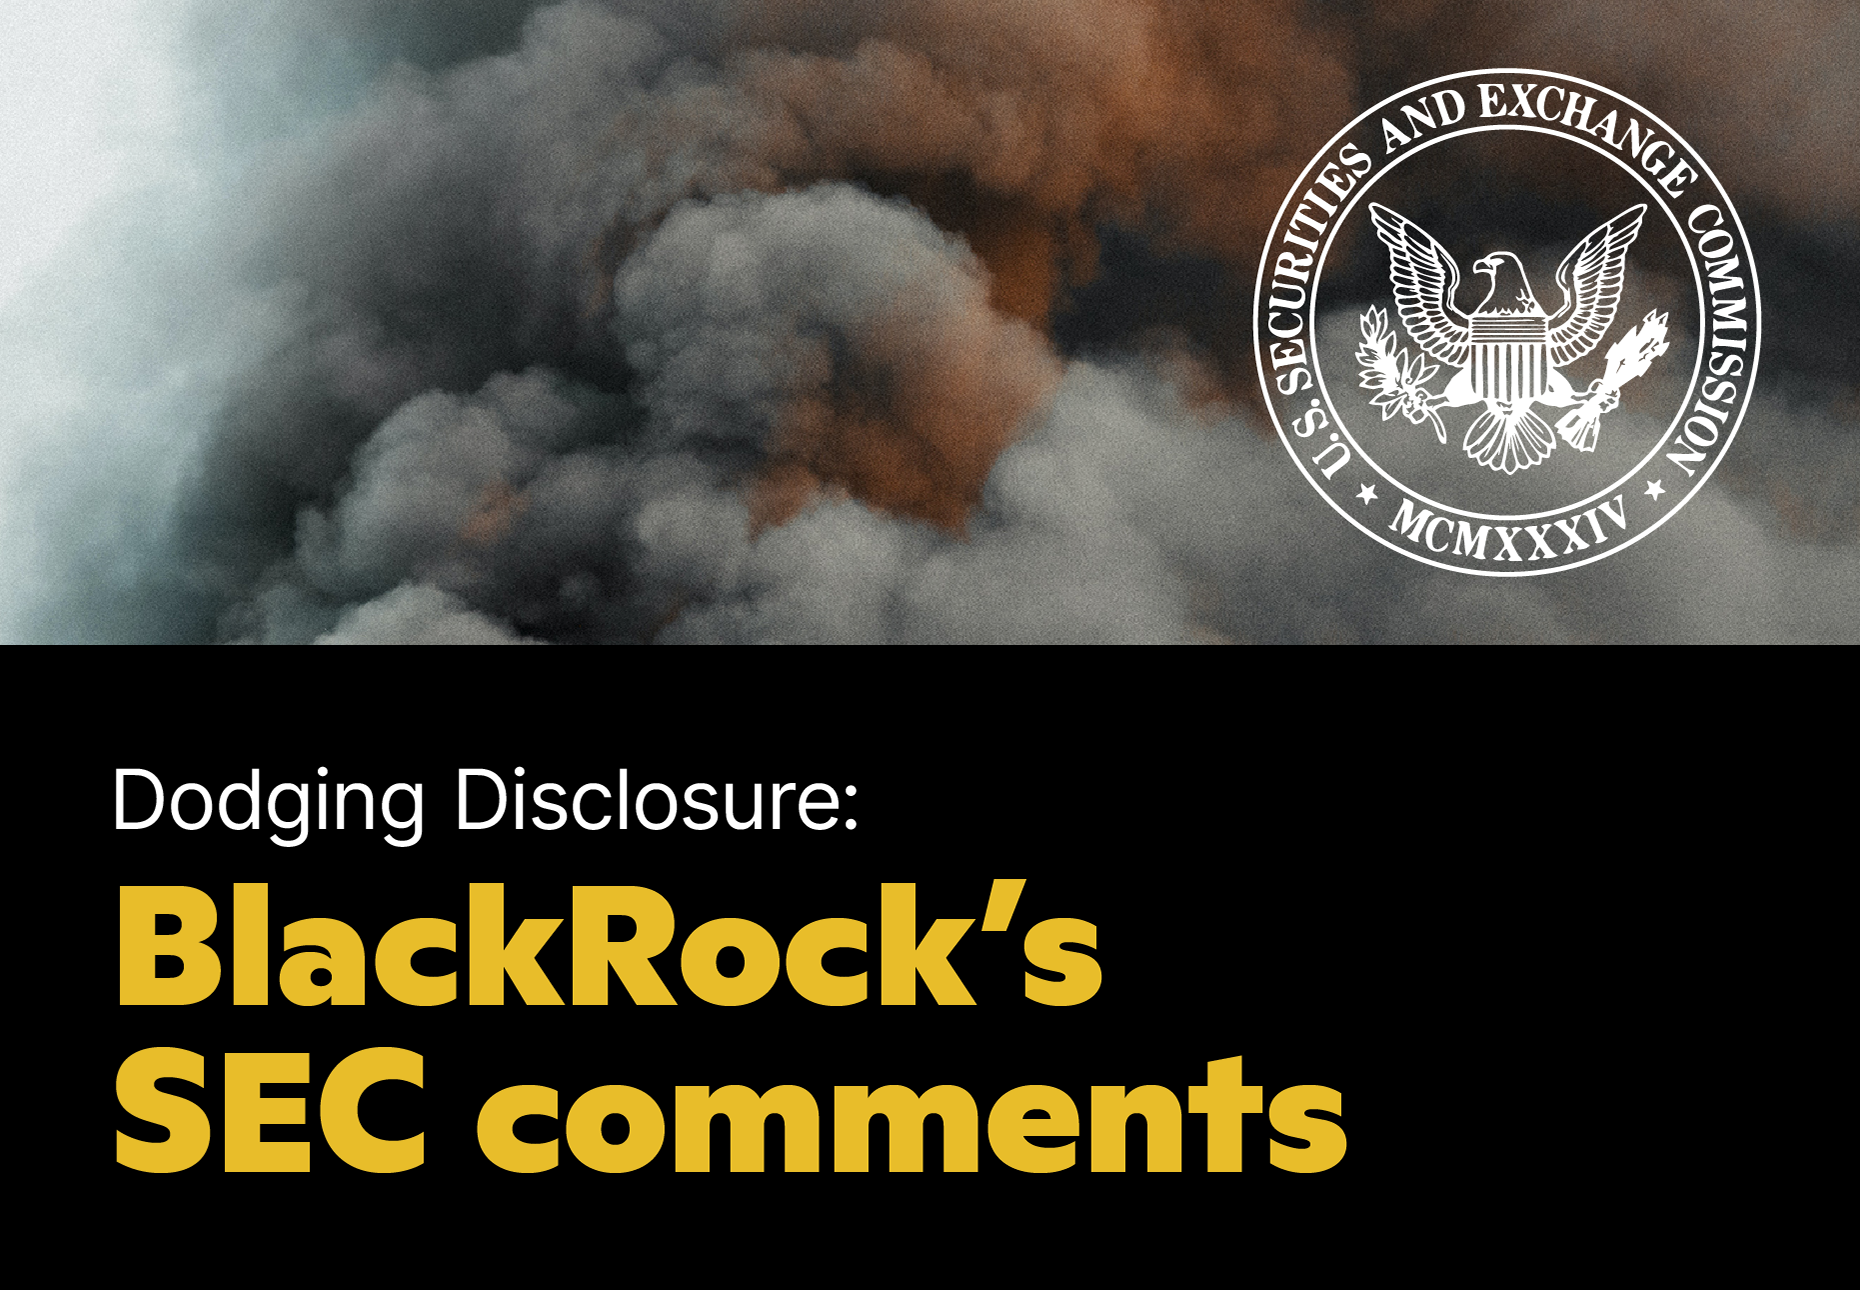 Billowing clouds of smoke with the SEC logo on the right side. A black banner runs along the bottom of the image with text reading: Dodging Disclosure: BlackRock's SEC comments